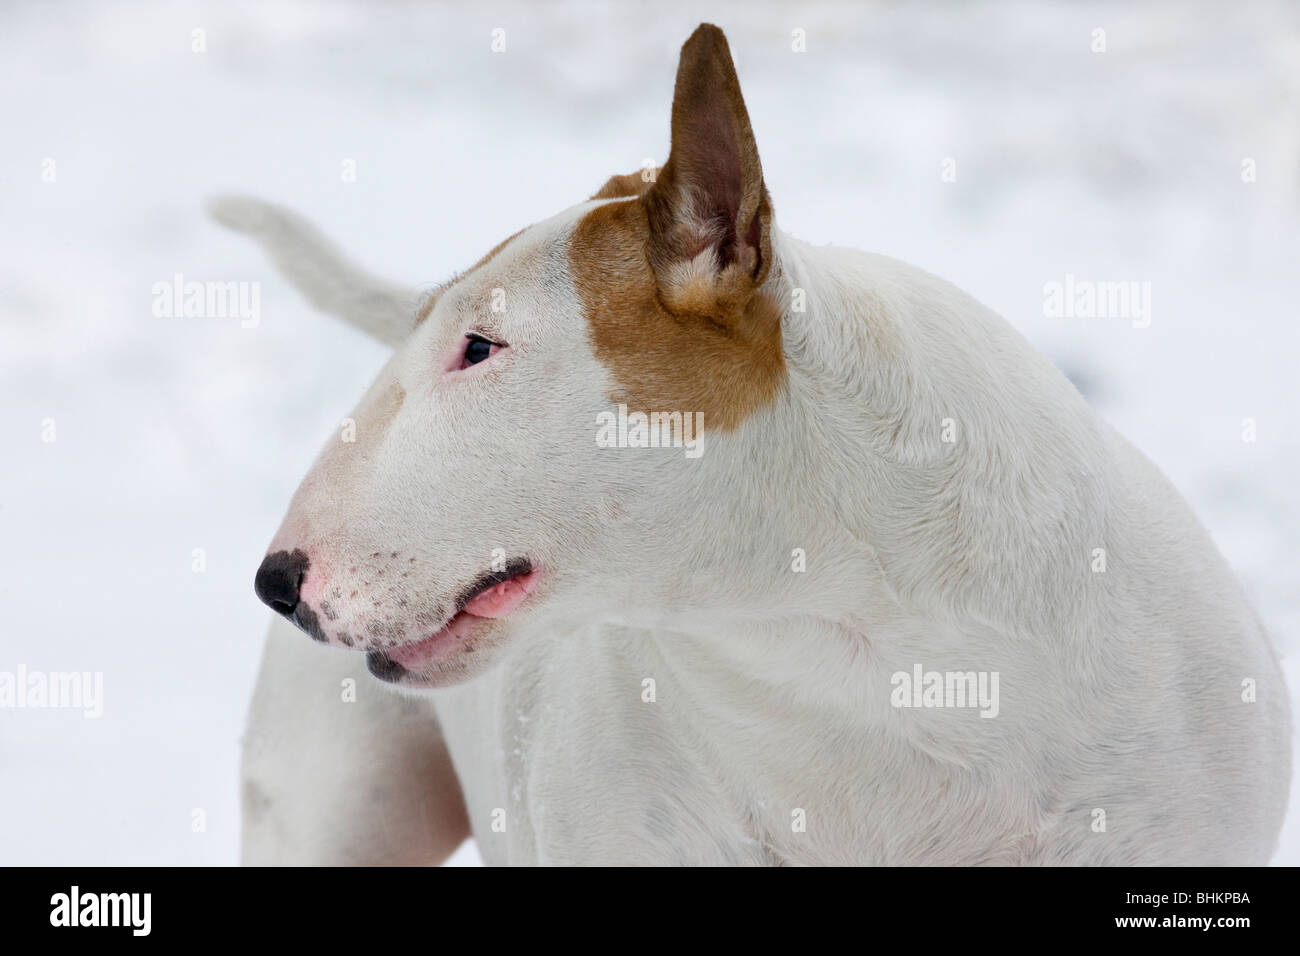 English Bull Terrier (Canis lupus familiaris) portrait in winter in the snow Stock Photo